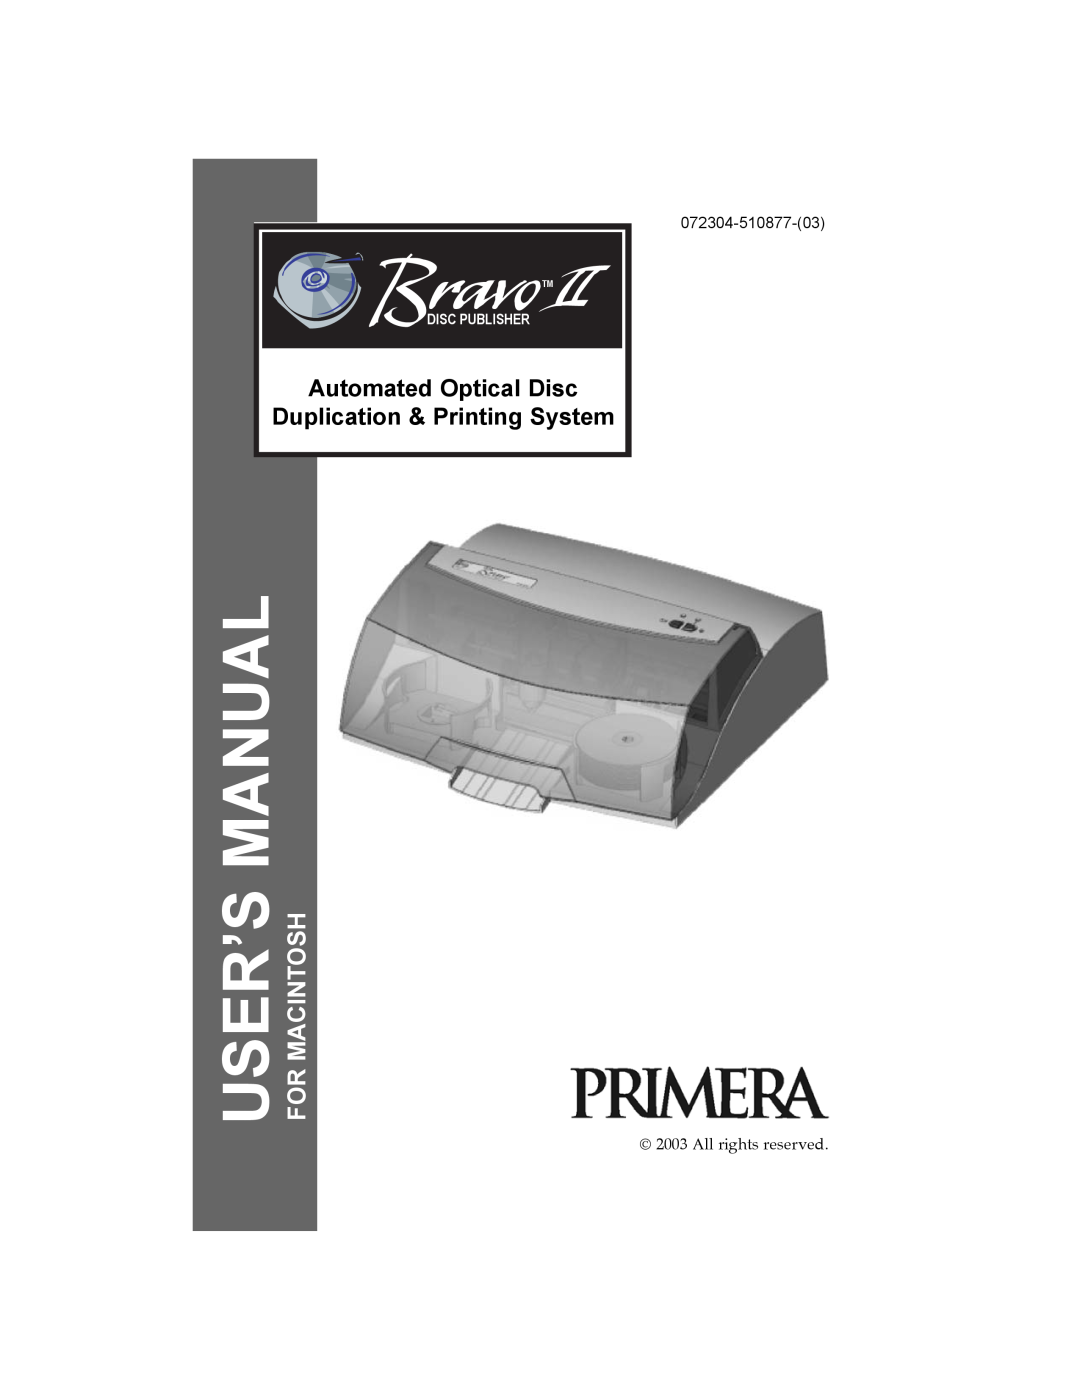 Primera Technology II user manual For Macintosh and PC, Auttomated Optical Disc, Duplication & Printing System 